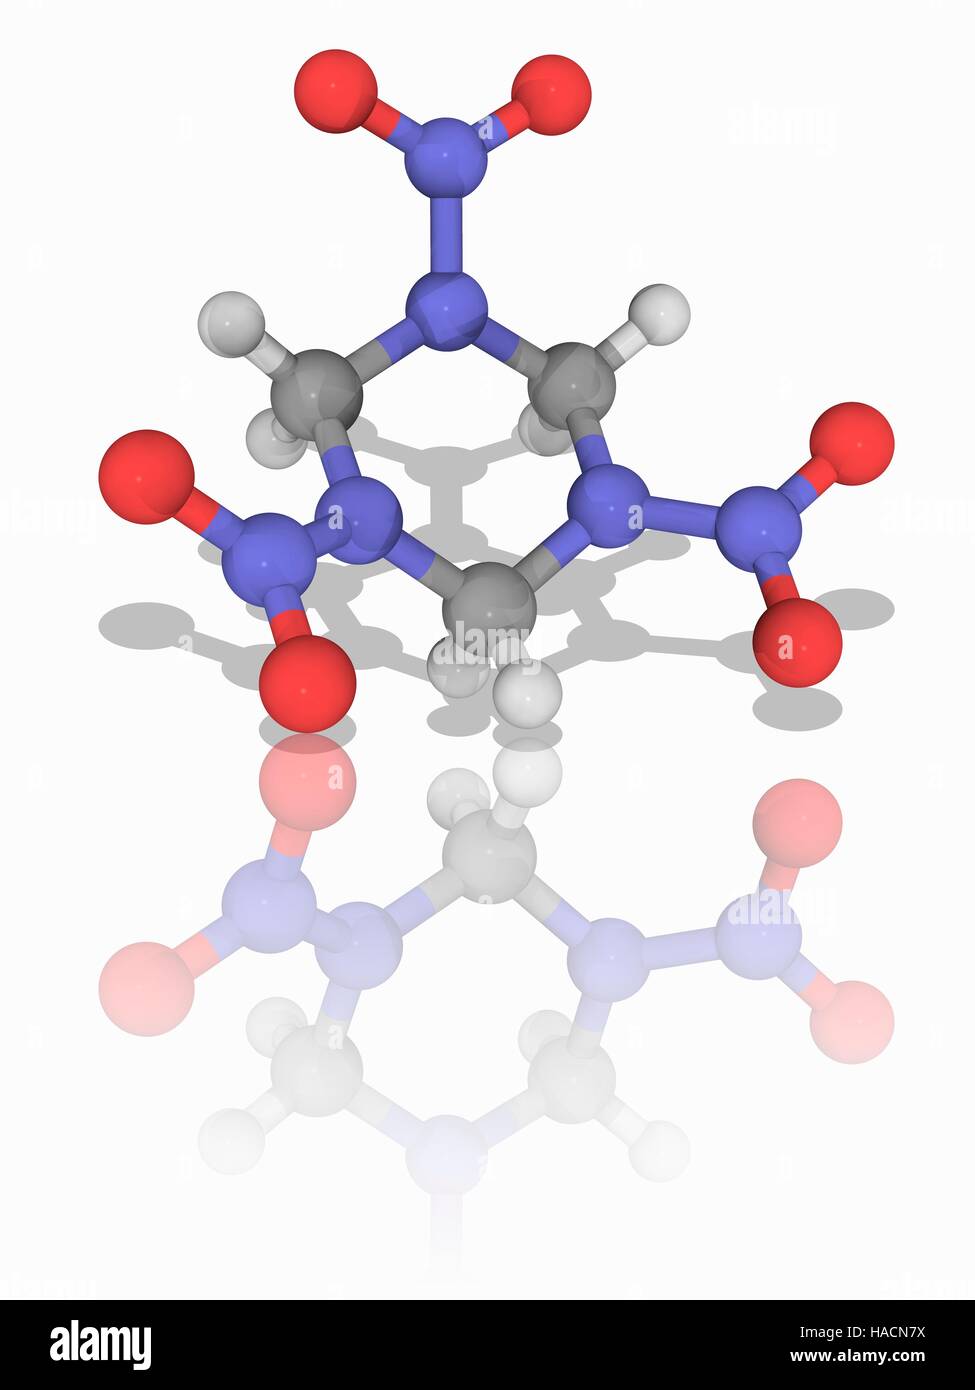 RDX explosive. Molecular model of the explosive RDX, also known as cyclonite (C3.H6.N6.O6). This explosive nitroamine has military and industrial applications, and was used extensively in World War II. Atoms are represented as spheres and are colour-coded: carbon (grey), hydrogen (white), nitrogen (blue) and oxygen (red). Illustration. Stock Photo